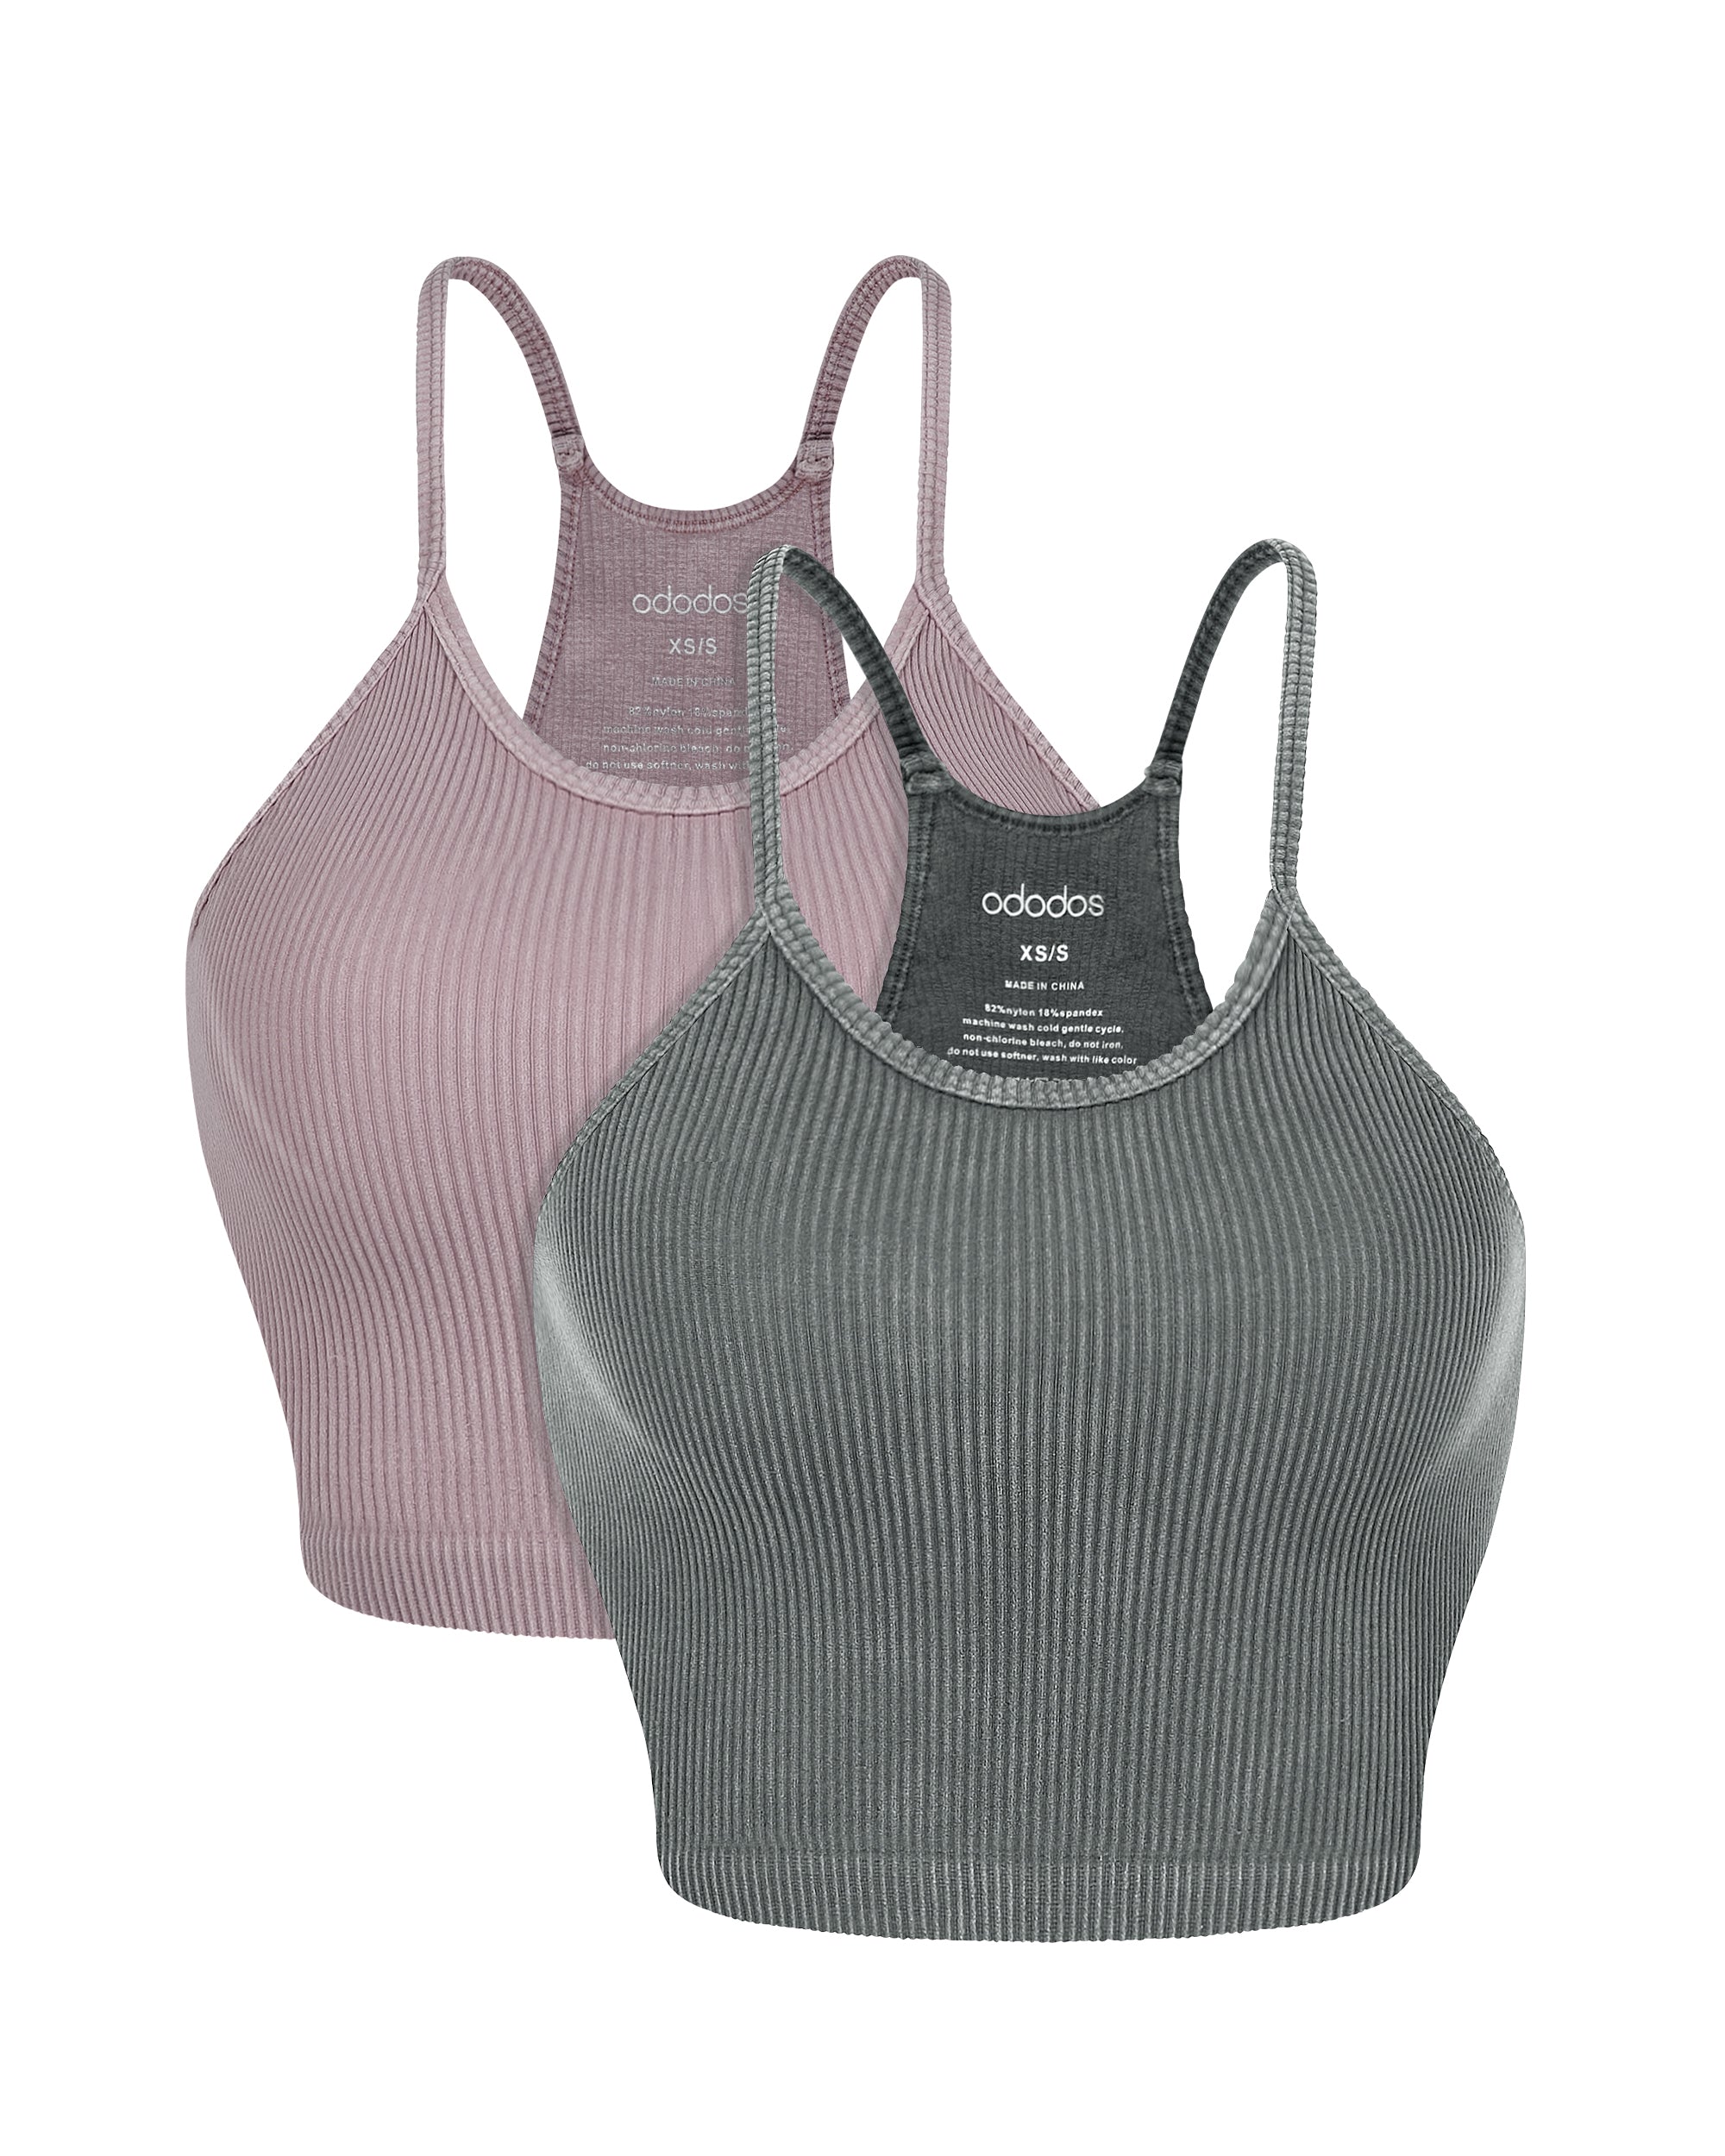 2-Pack Rib-Knit Crop Tank Tops Charcoal+Dusty Orchid - ododos